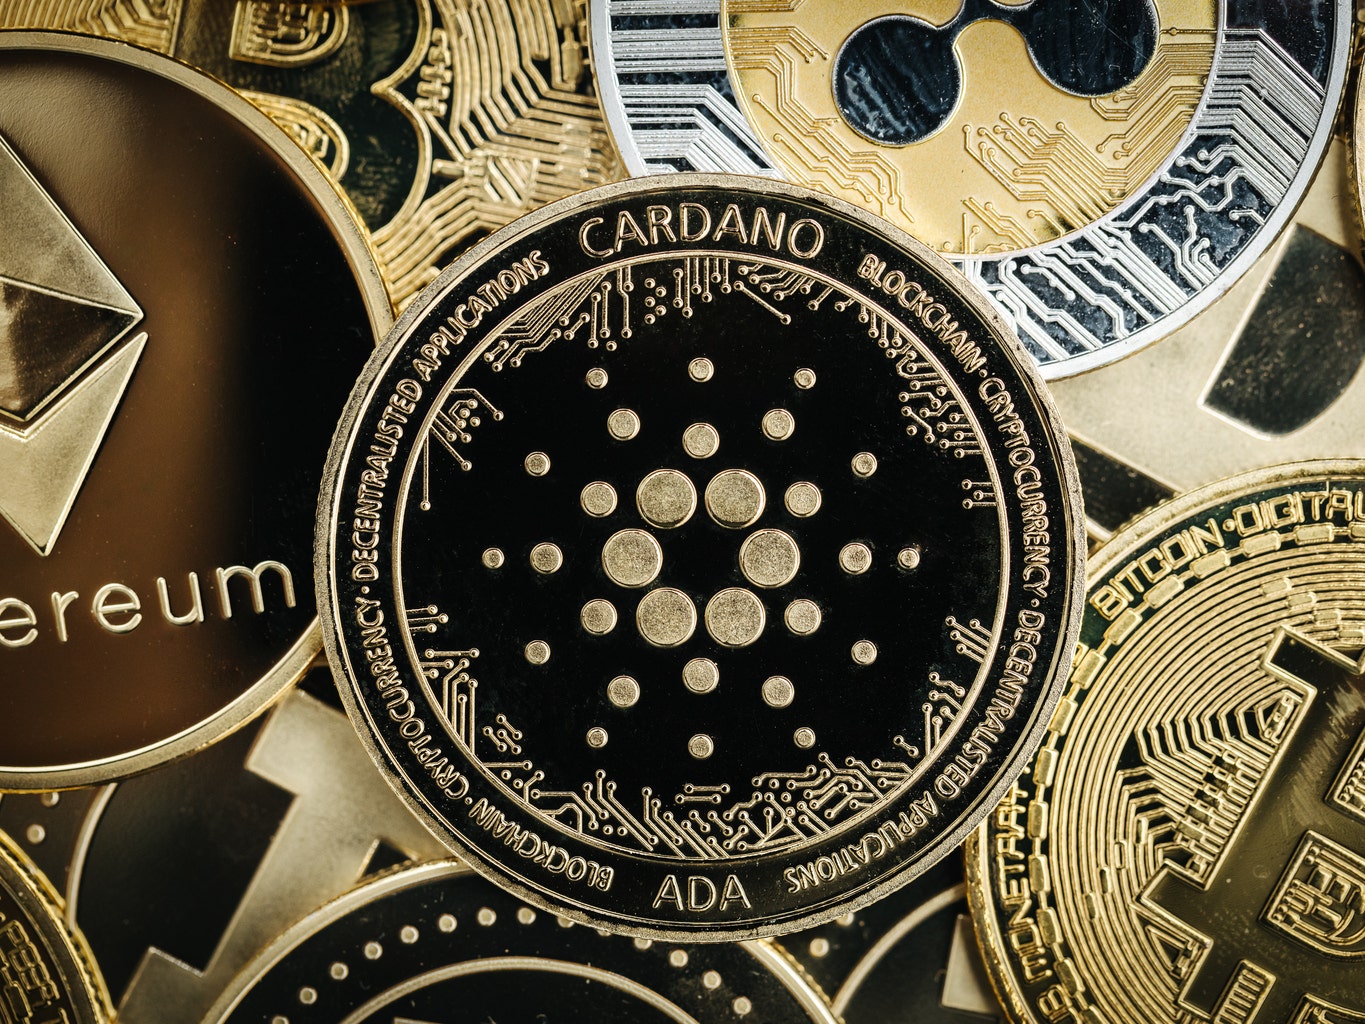 Cardano tokens extend gains as Coinbase expands staking offerings  (Cryptocurrency:ADA-USD) | Seeking Alpha